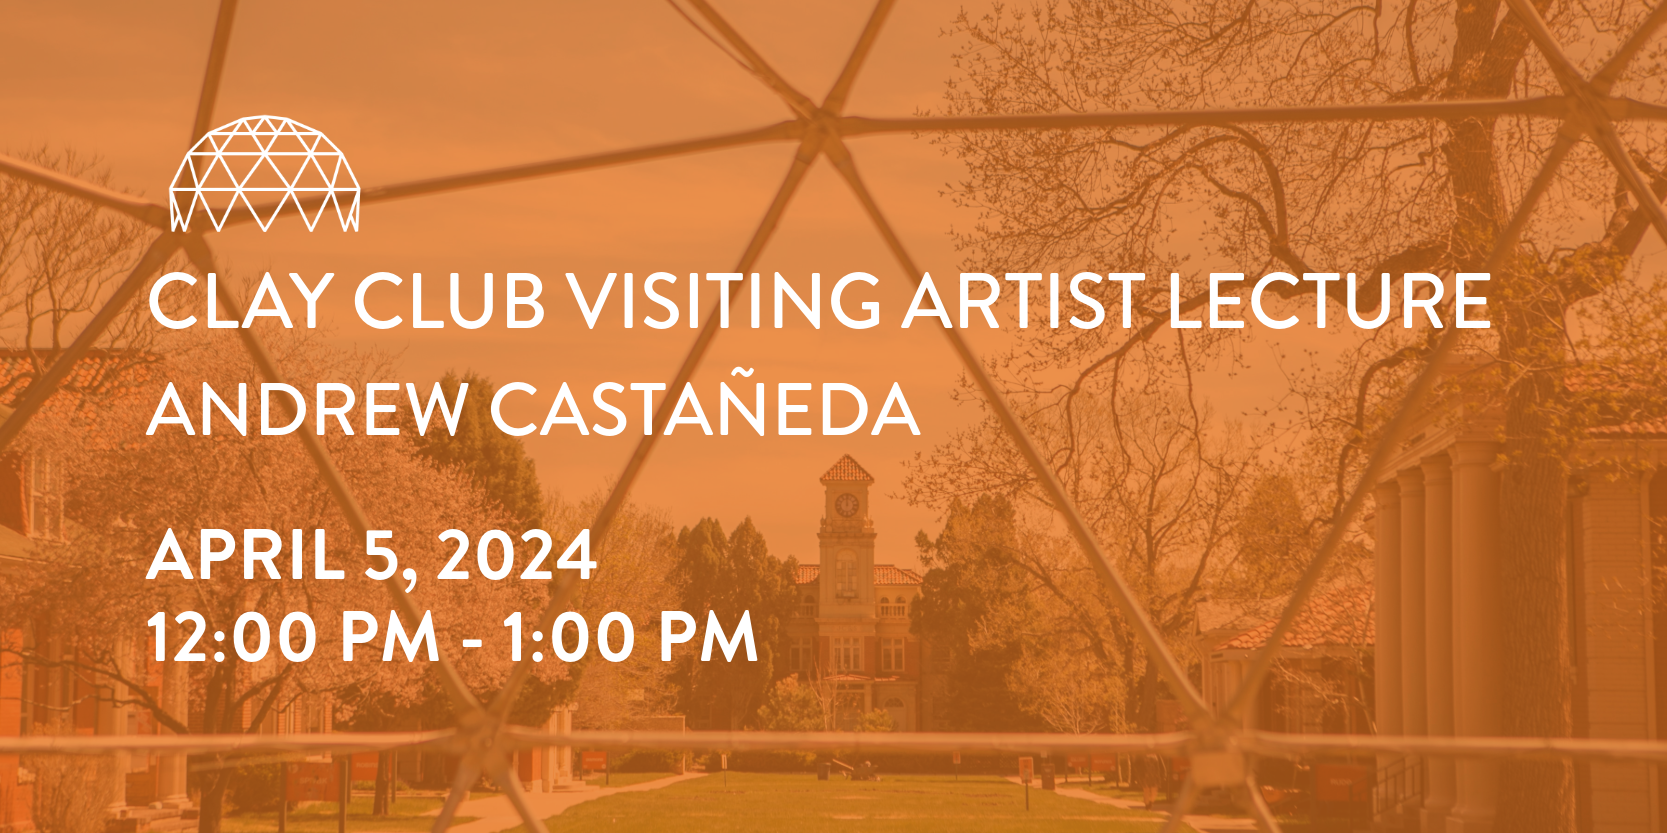 Clay Club Visiting Artist Lecture - Andrew Castañeda 4/5